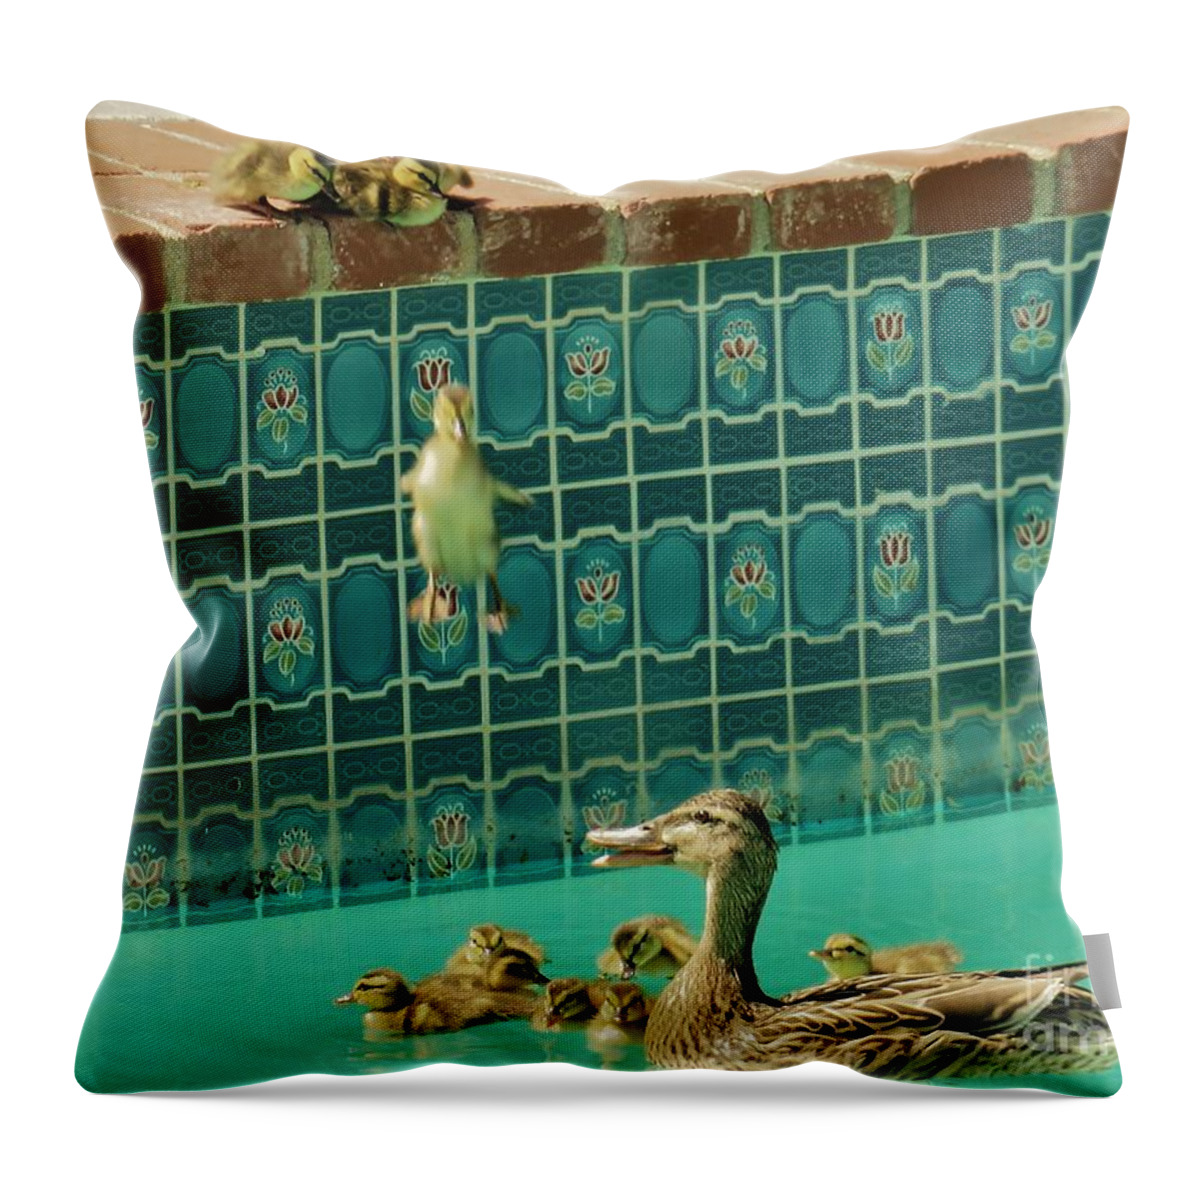 Duck Throw Pillow featuring the photograph Geronimo by Laurie Morgan